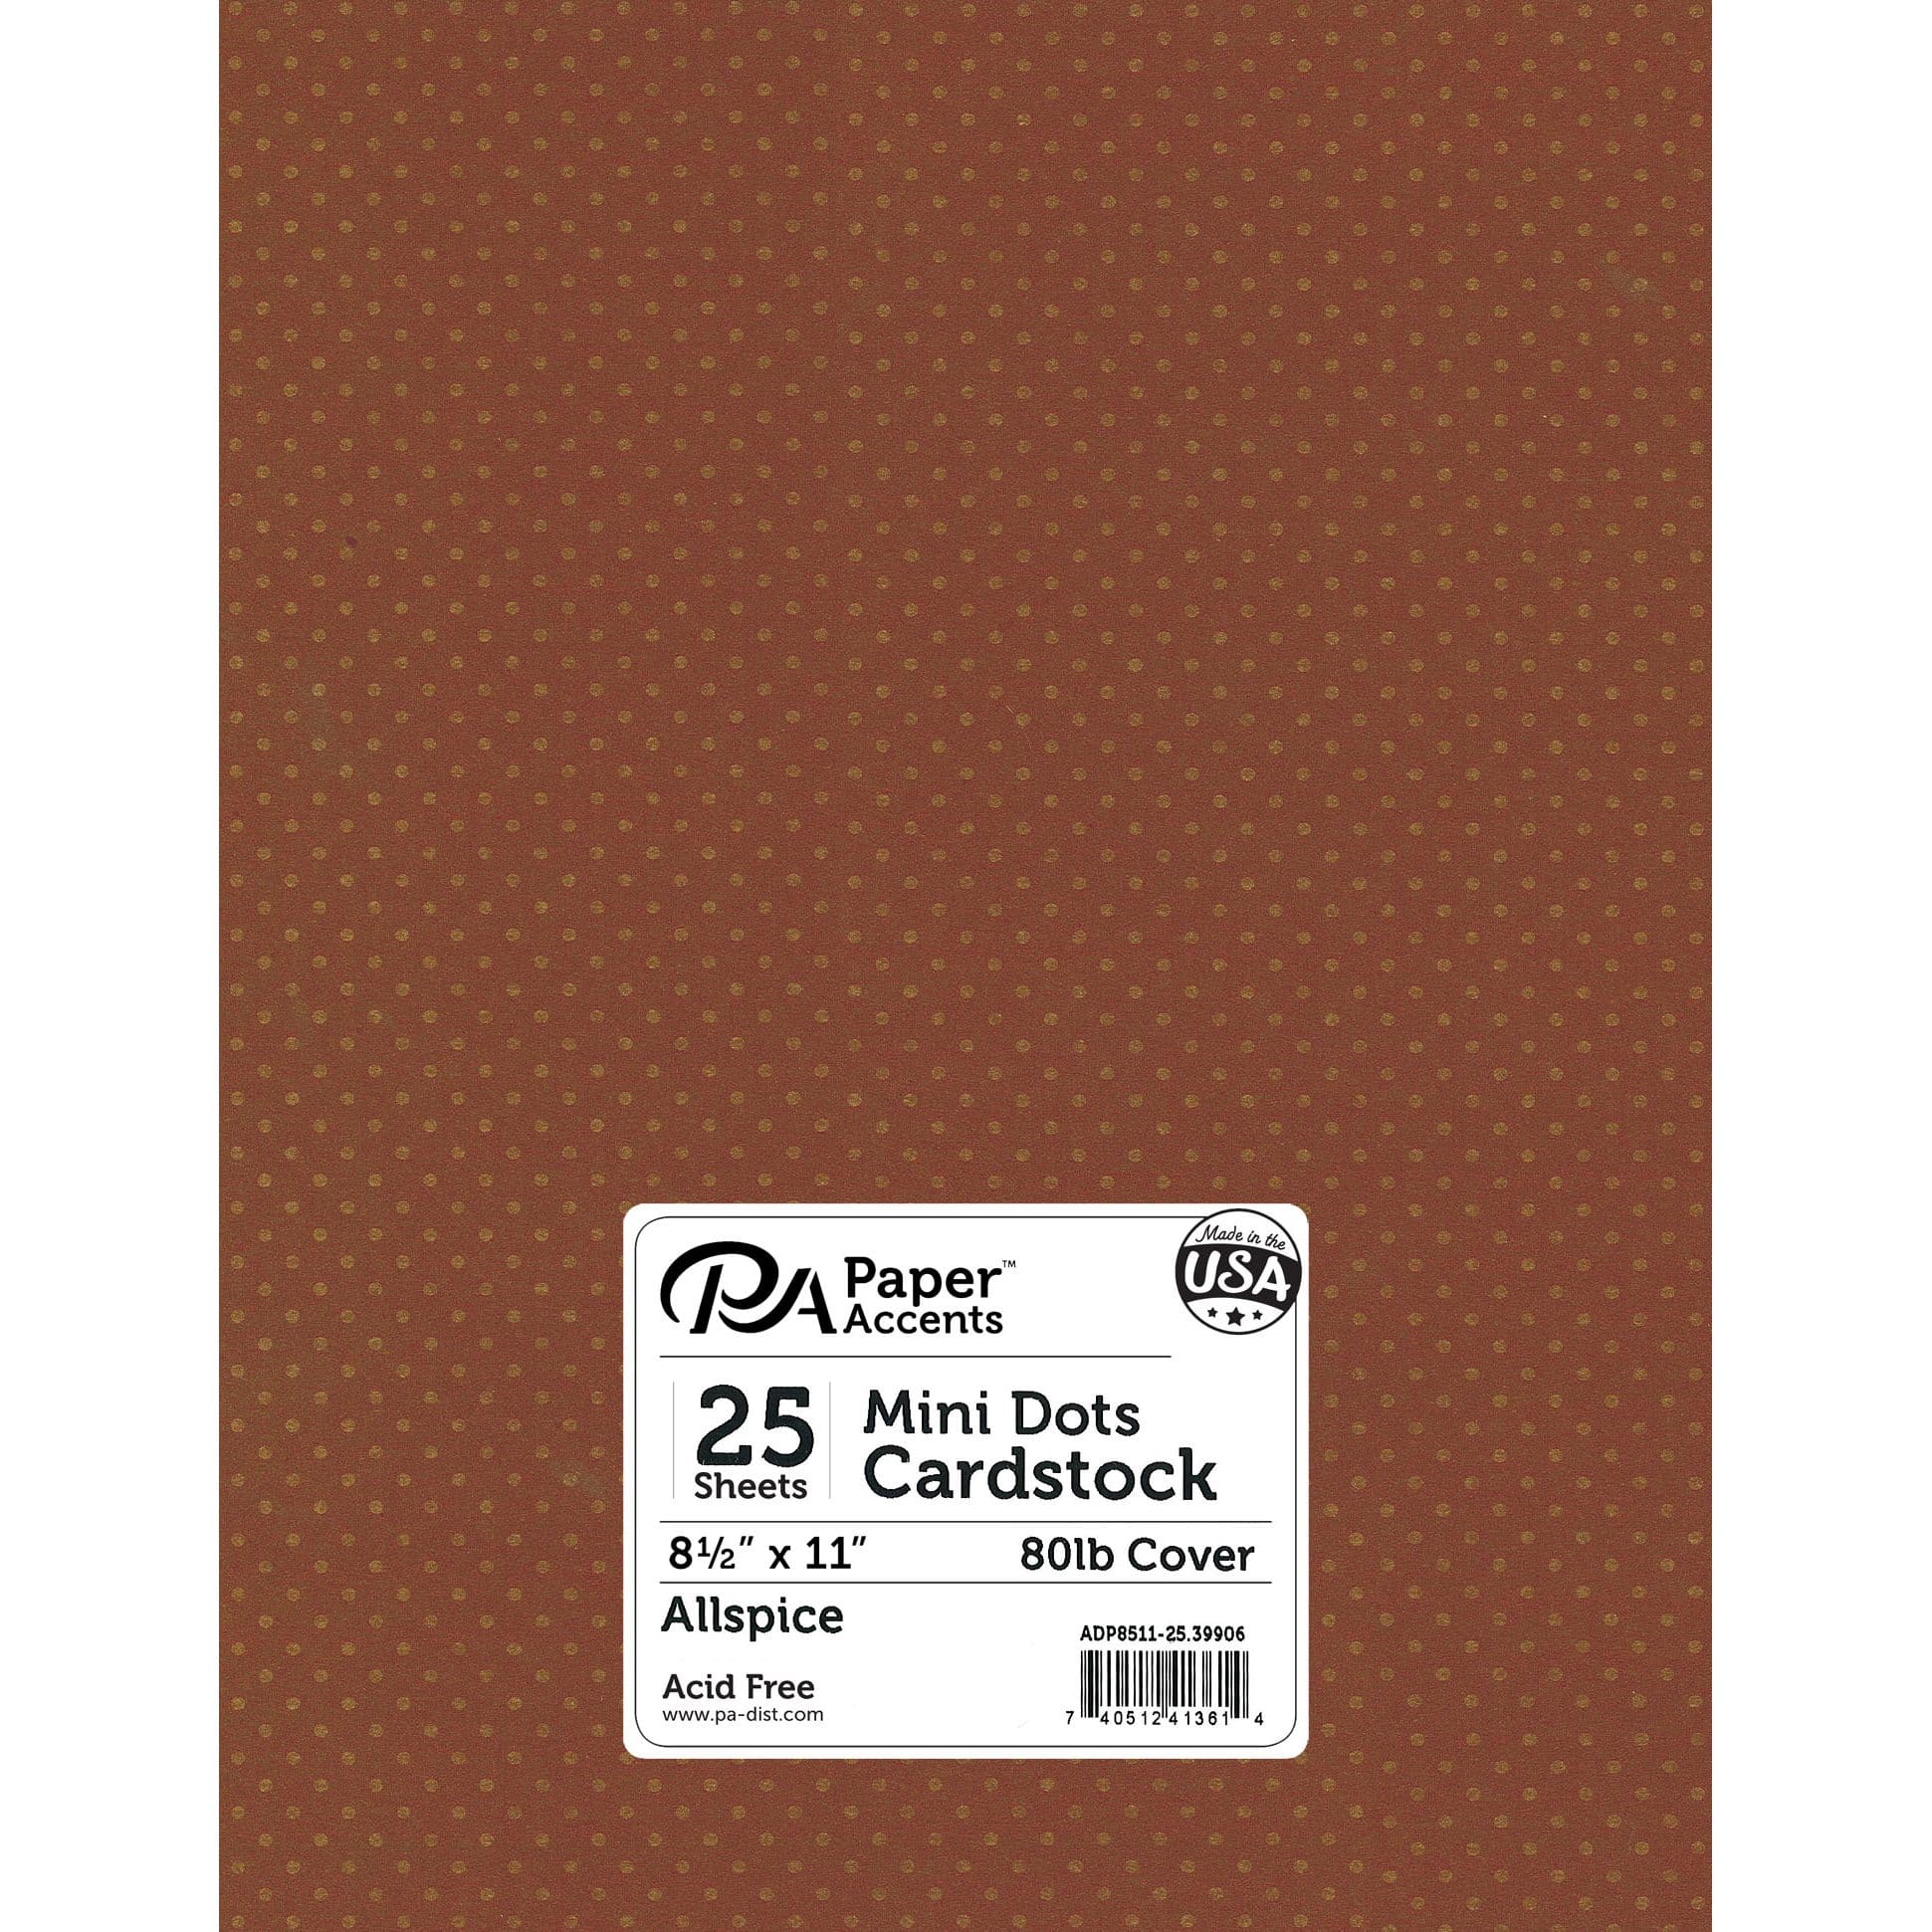 PA Paper™ Accents Mini Dot 8.5" x 11" Cardstock, 25 Sheets